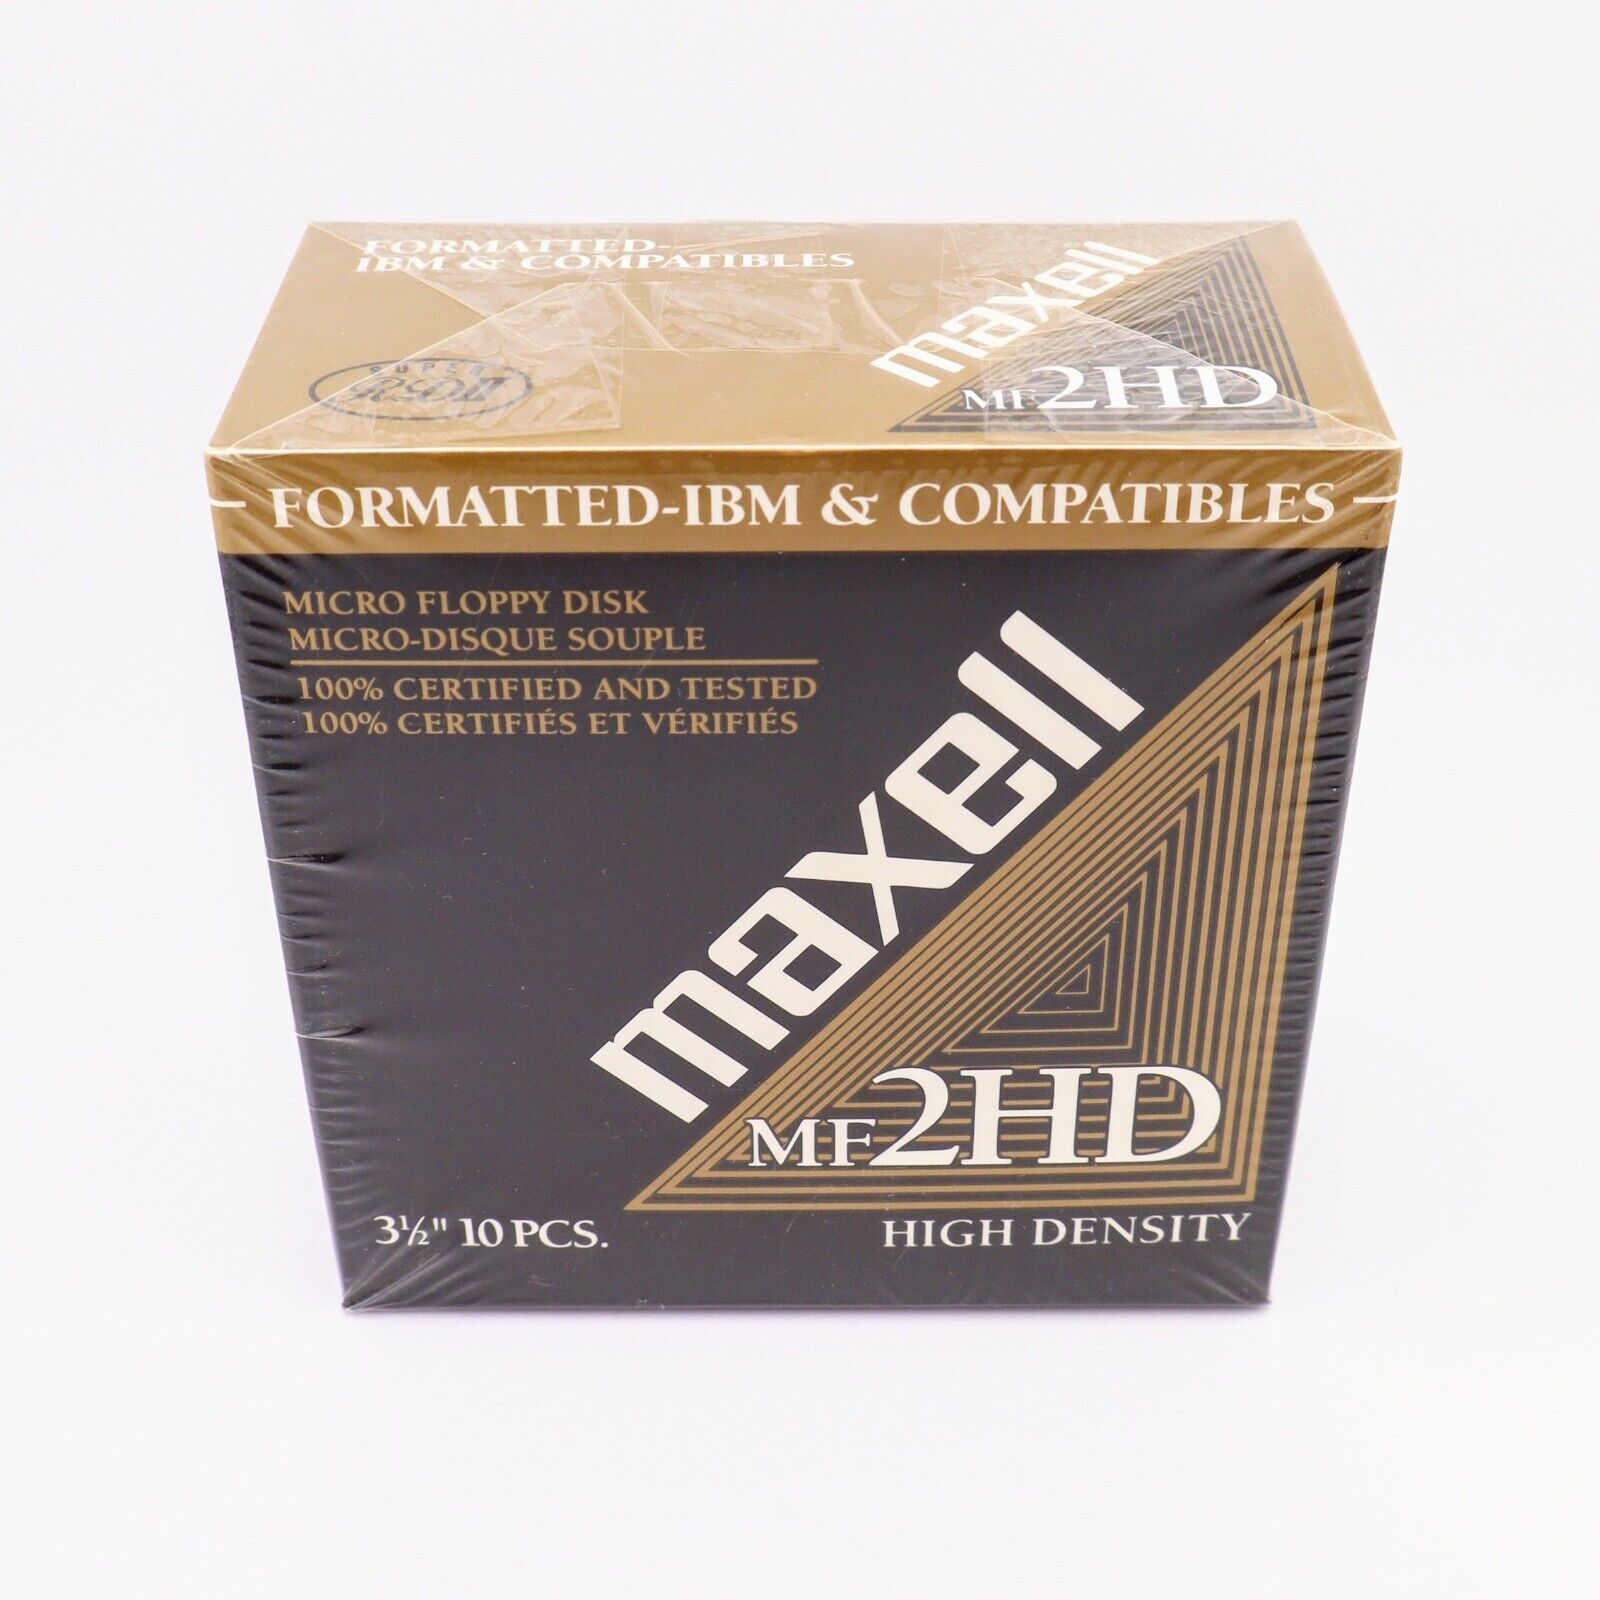 10 Pack Maxell MF 2HD IBM Formatted Floppy Disks  3 1/2 inch 3.5